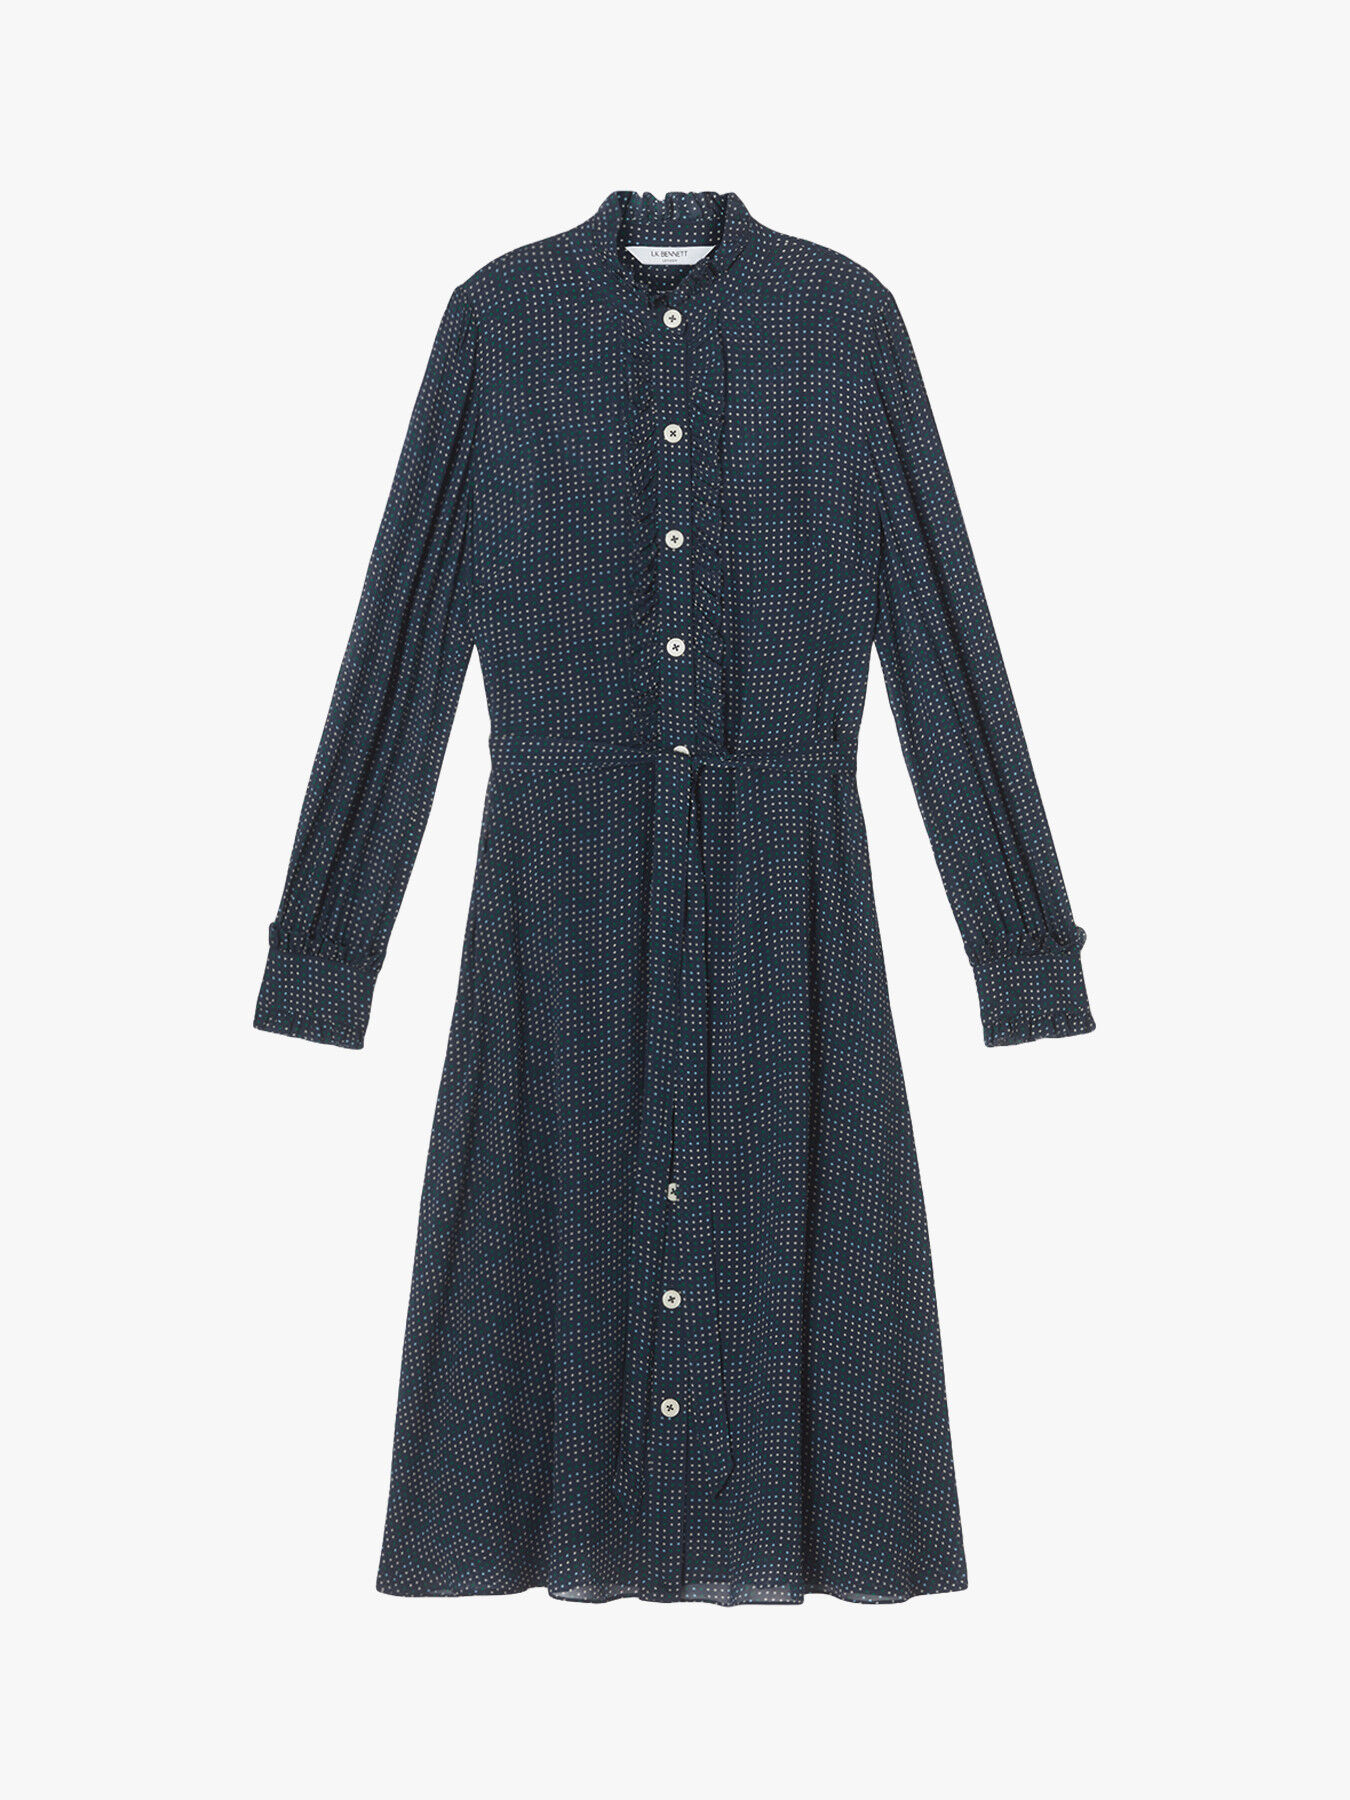 LK Bennett Dellal Navy Optical Spot Shirt Dress in Blue Womens Clothing Dresses Casual and day dresses 